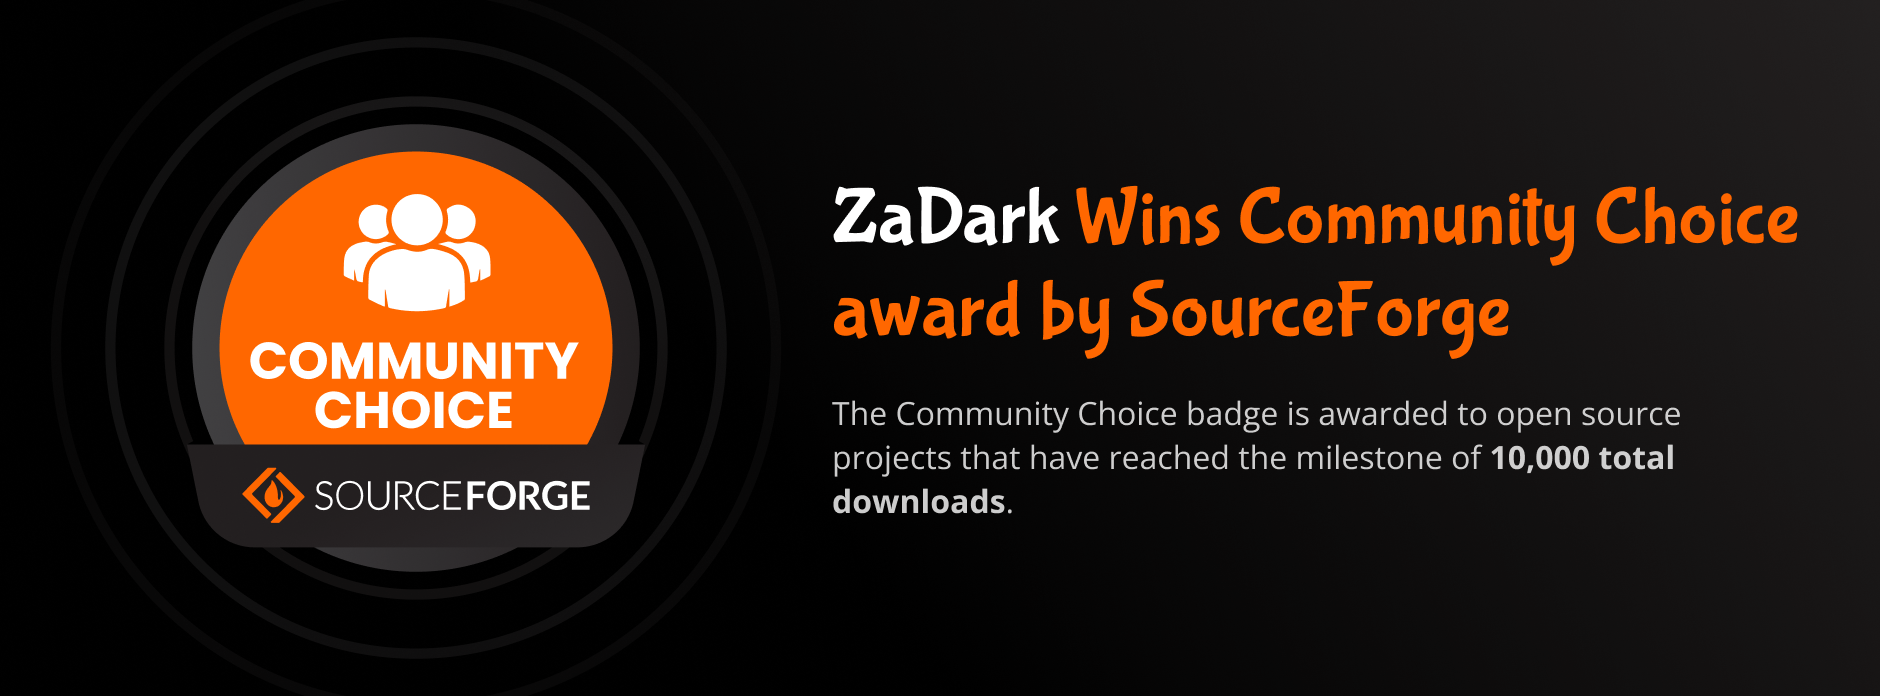 Community Choice award by SourceForge